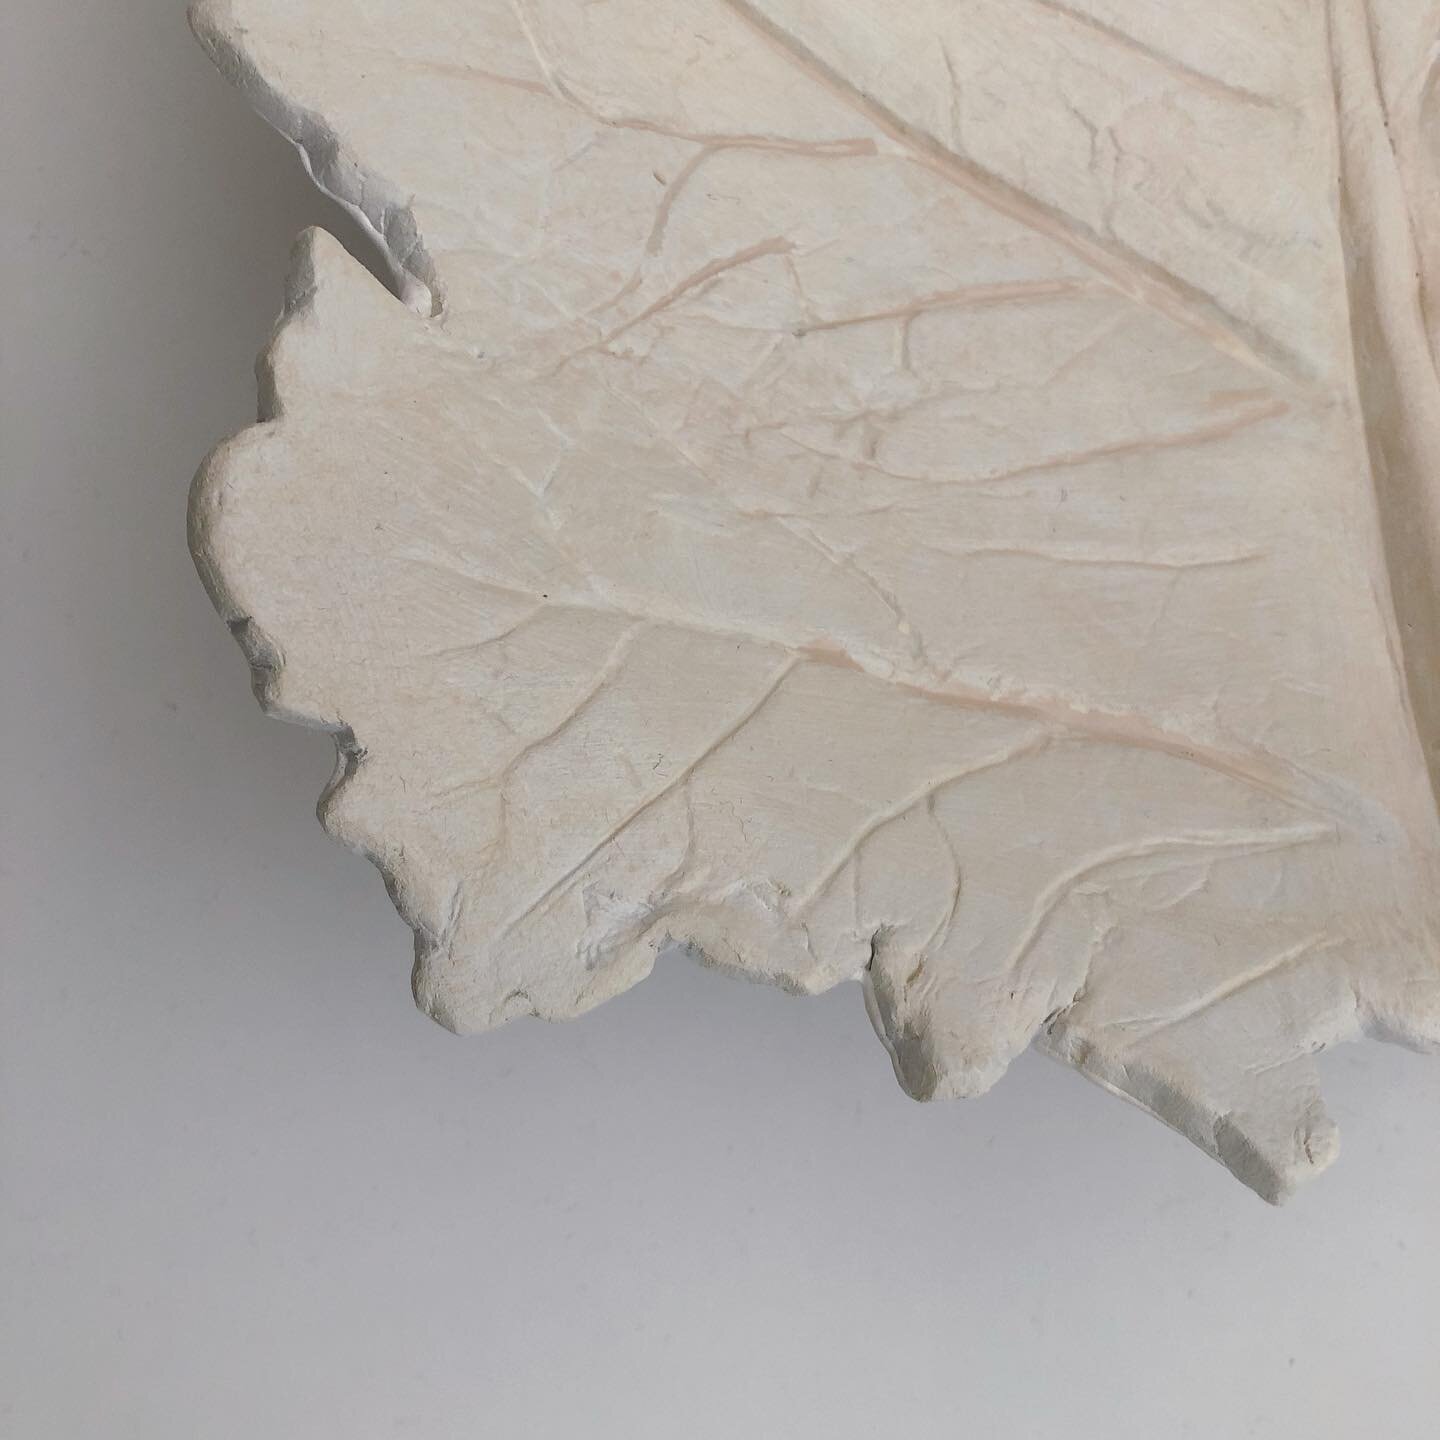 A throwback to my ceramic leaf bowl DIY and a little BTS, I&rsquo;m filming with clay again tomorrow. Any guesses? 🤭
.
.
.
#blog #blogger #home #homedecor #homemade #homesweethome #homestyle #homestyling #clay #bowl #leaf #ceramics #ceramic #art #de